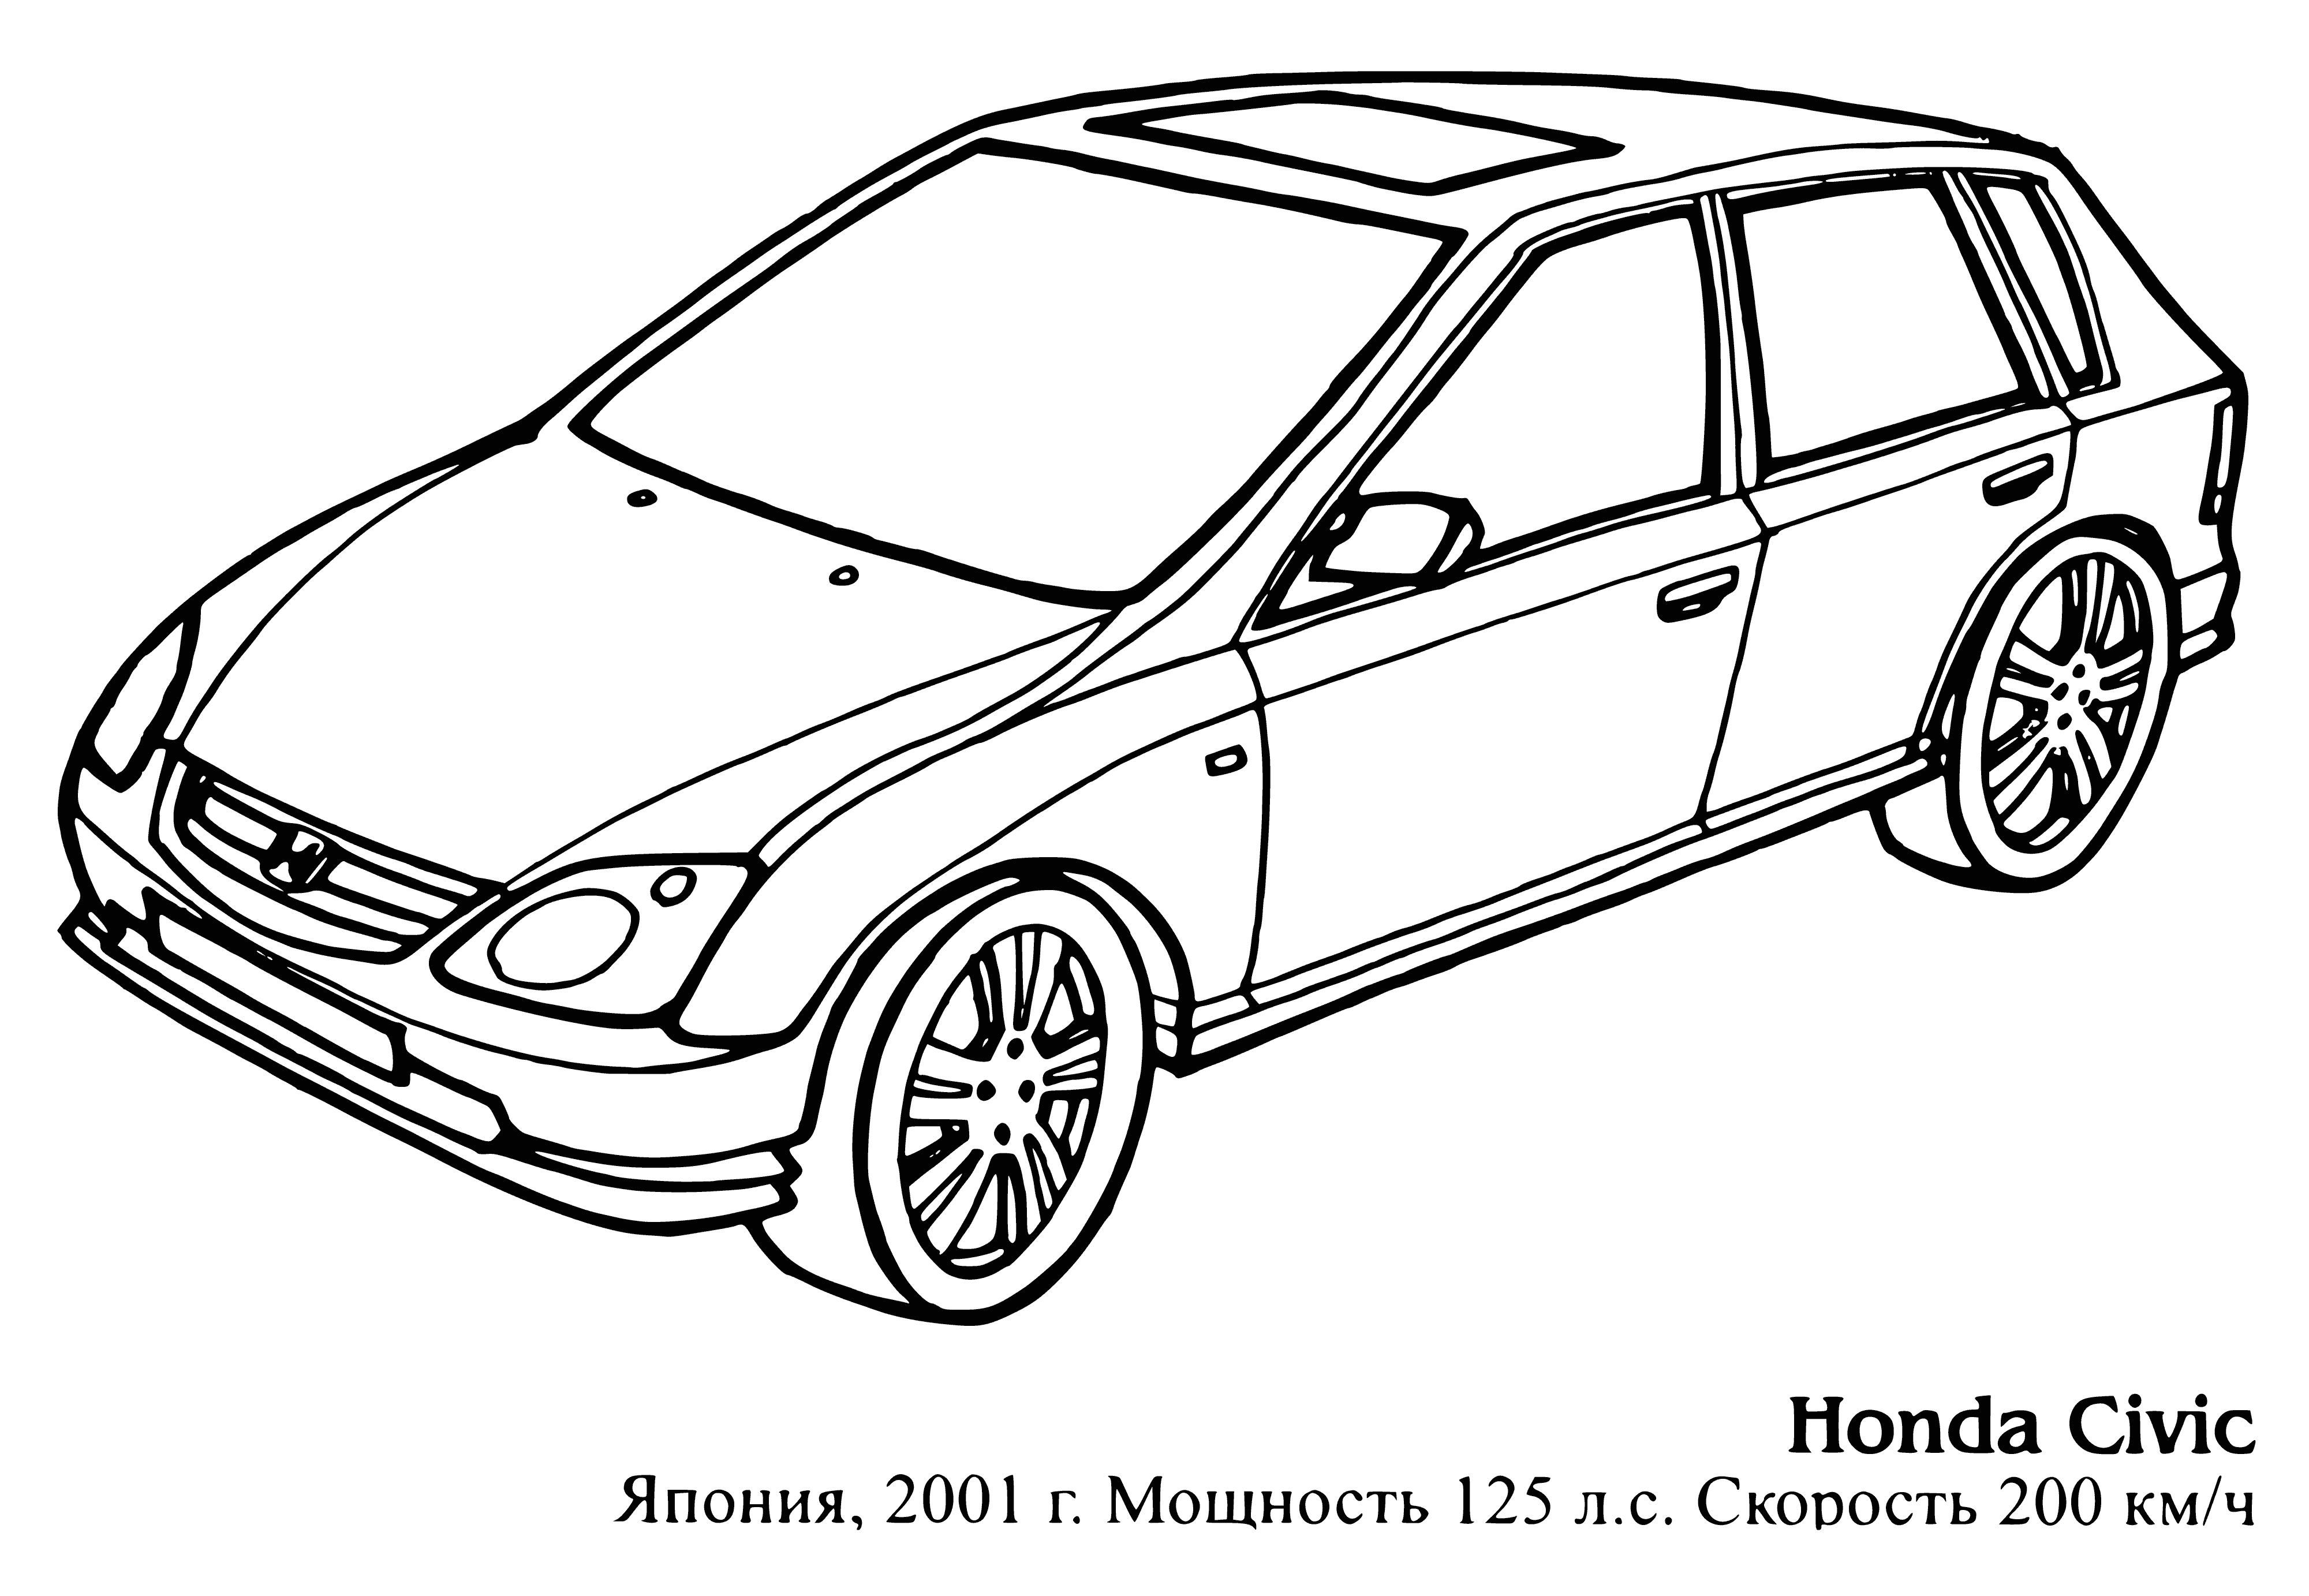 coloring page: Compact car, 5-seater, 4-cylinder engine, front-wheel drive, silver/black exterior, black interior.